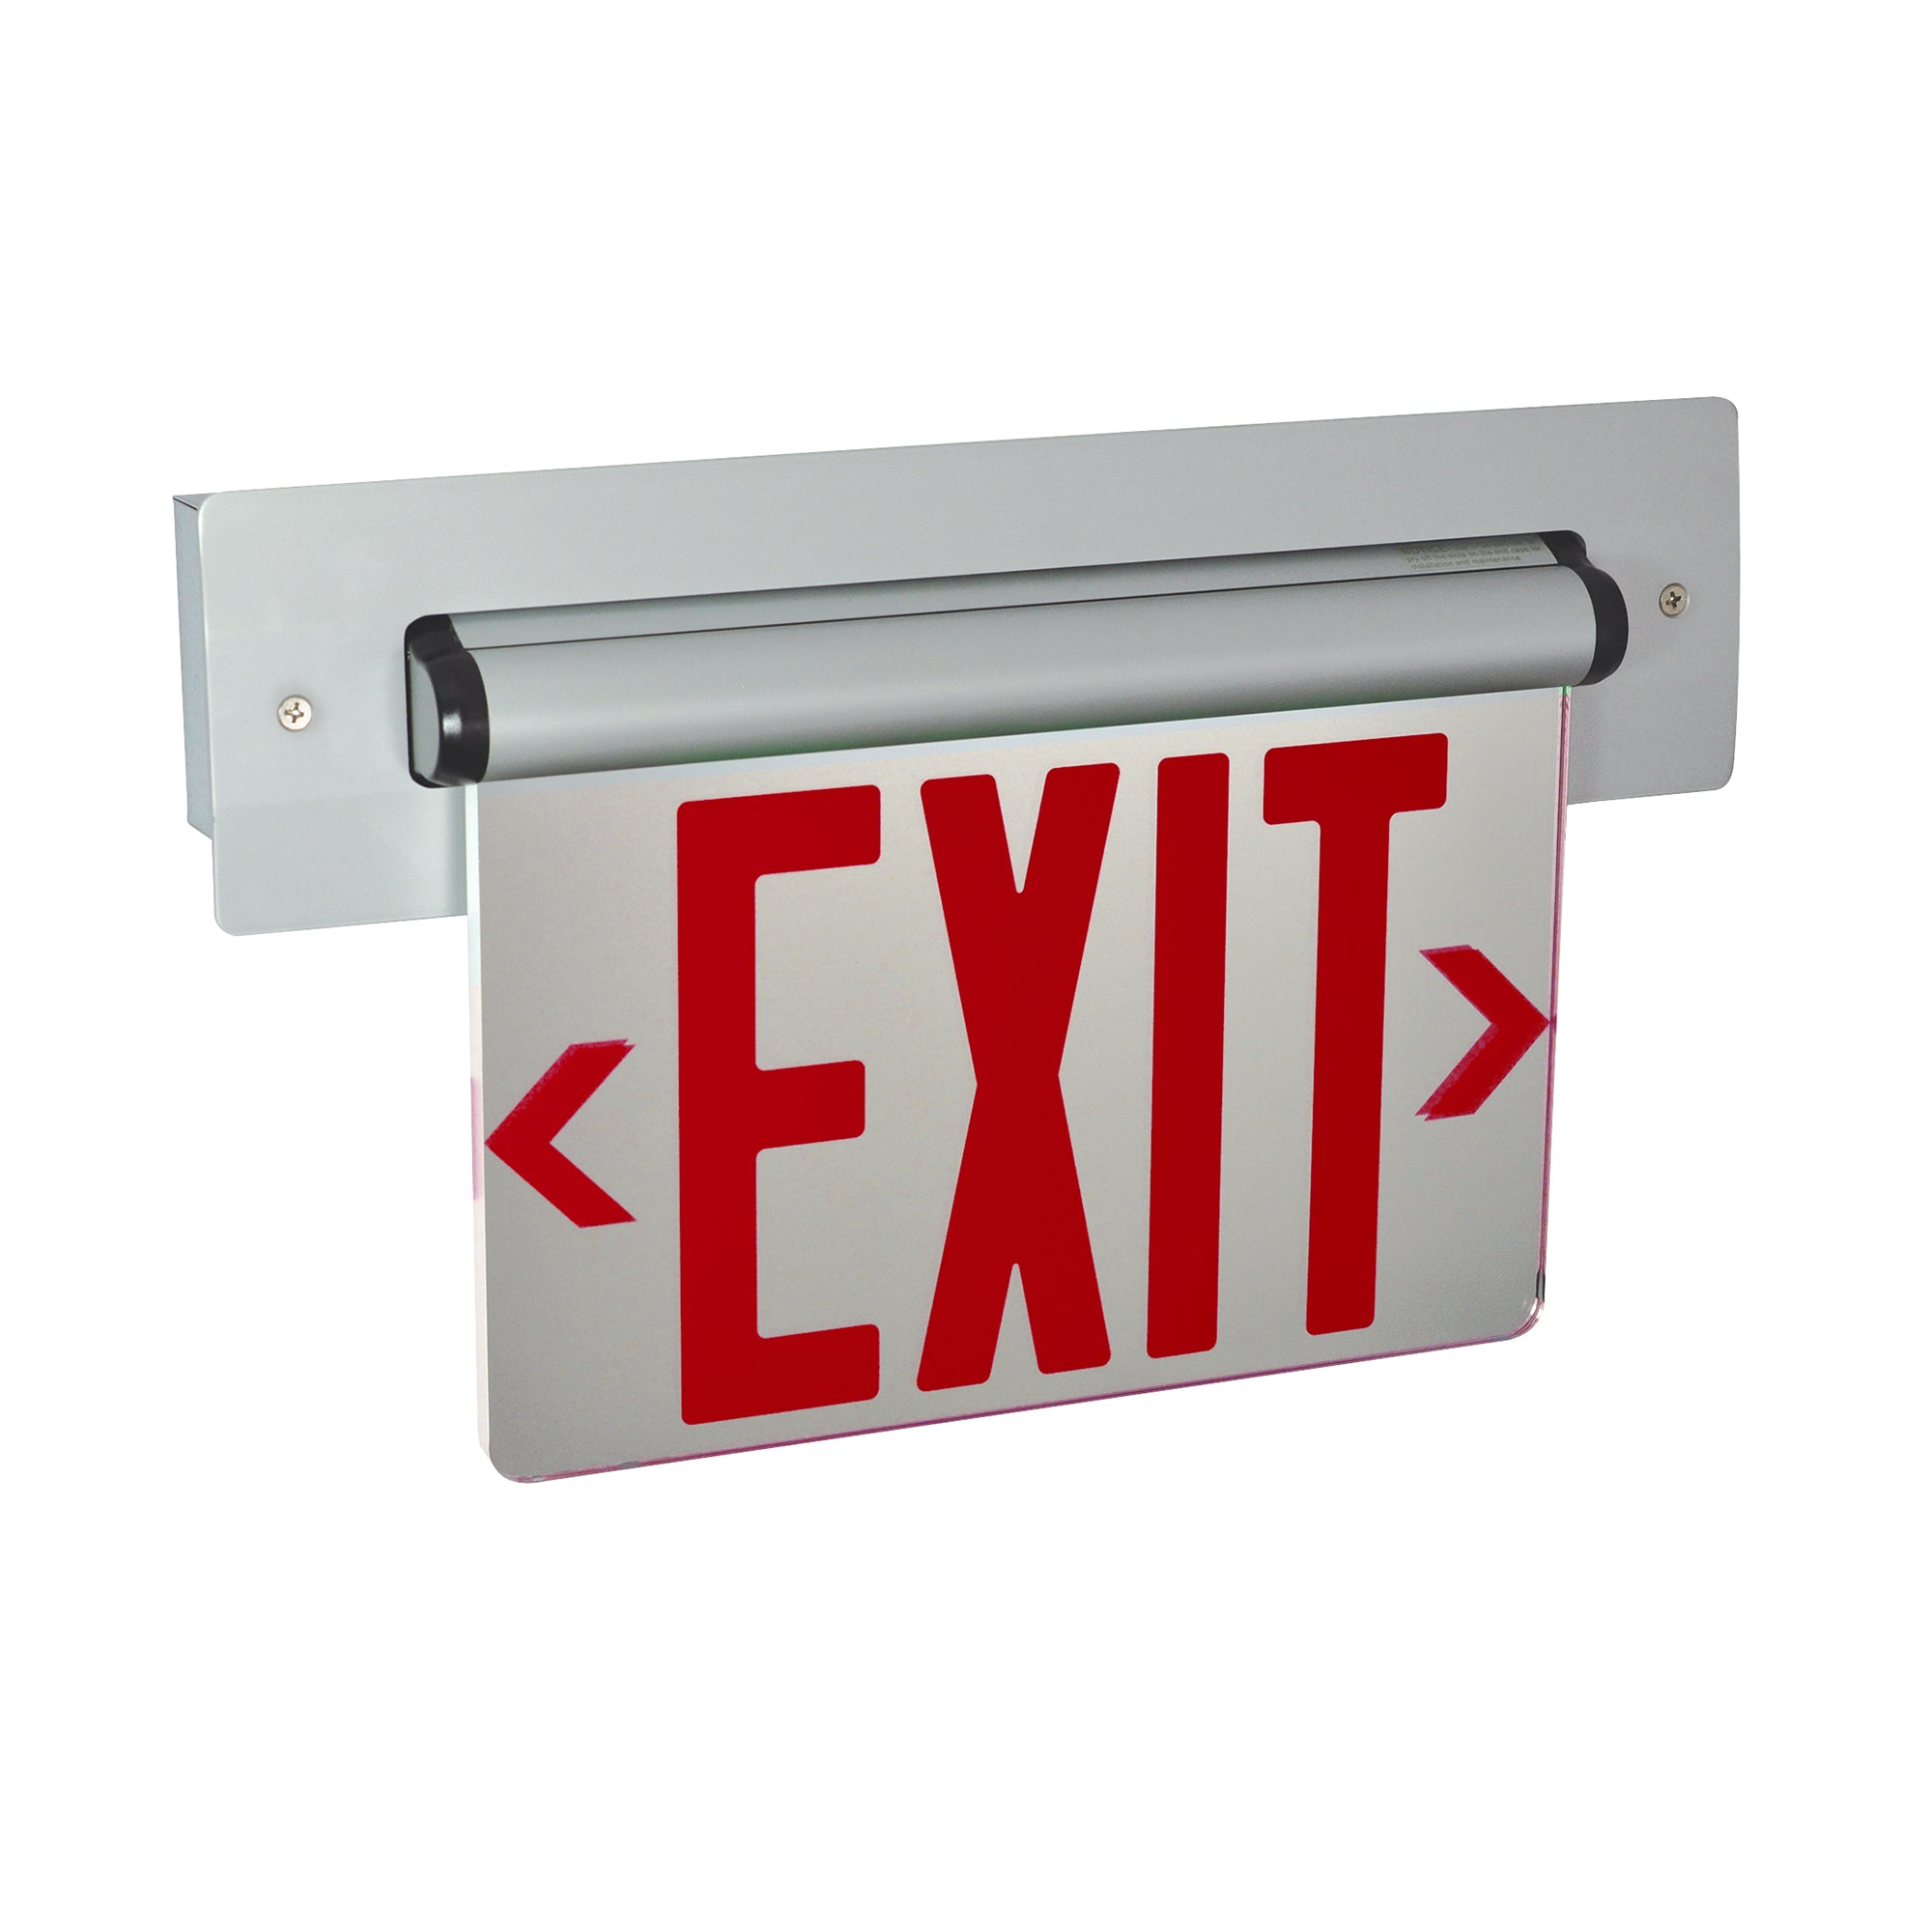 Nora Lighting NX-814-LEDRMA - Exit / Emergency - Recessed Adjustable LED Edge-Lit Exit Sign, 2 Circuit, 6 Inch Red Letters, Single Face / Mirrored Acrylic, Aluminum Housing